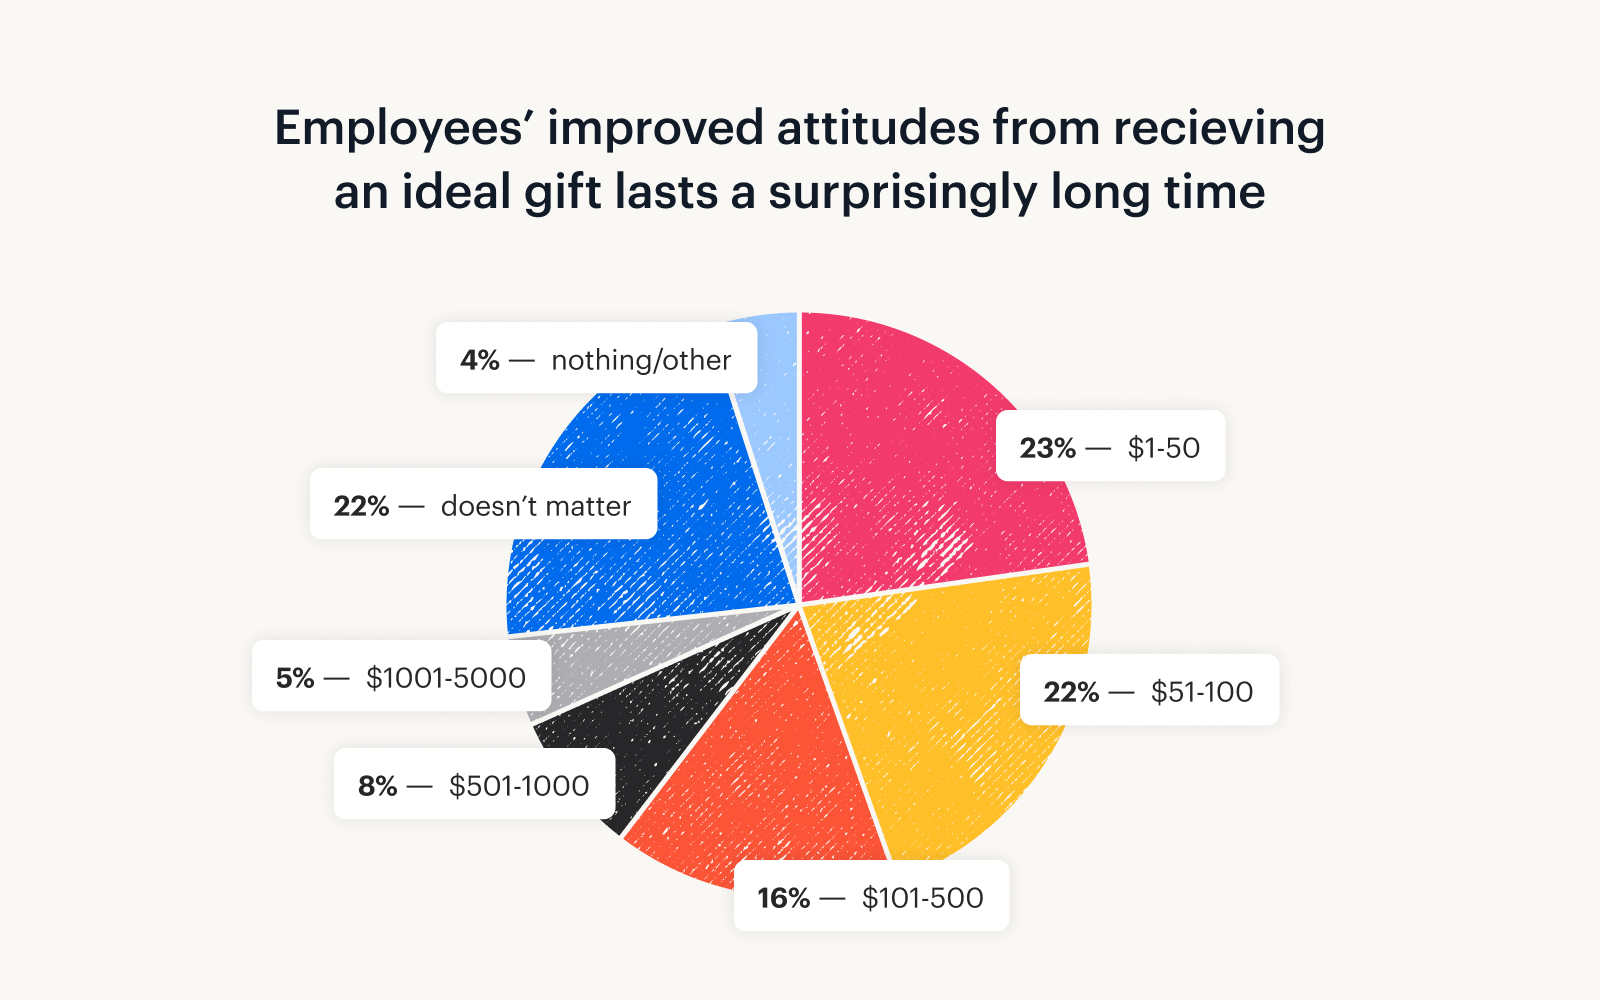 A graph showing that employee's improved attitudes from recieving an ideal gift lasts a surprisingly long time.